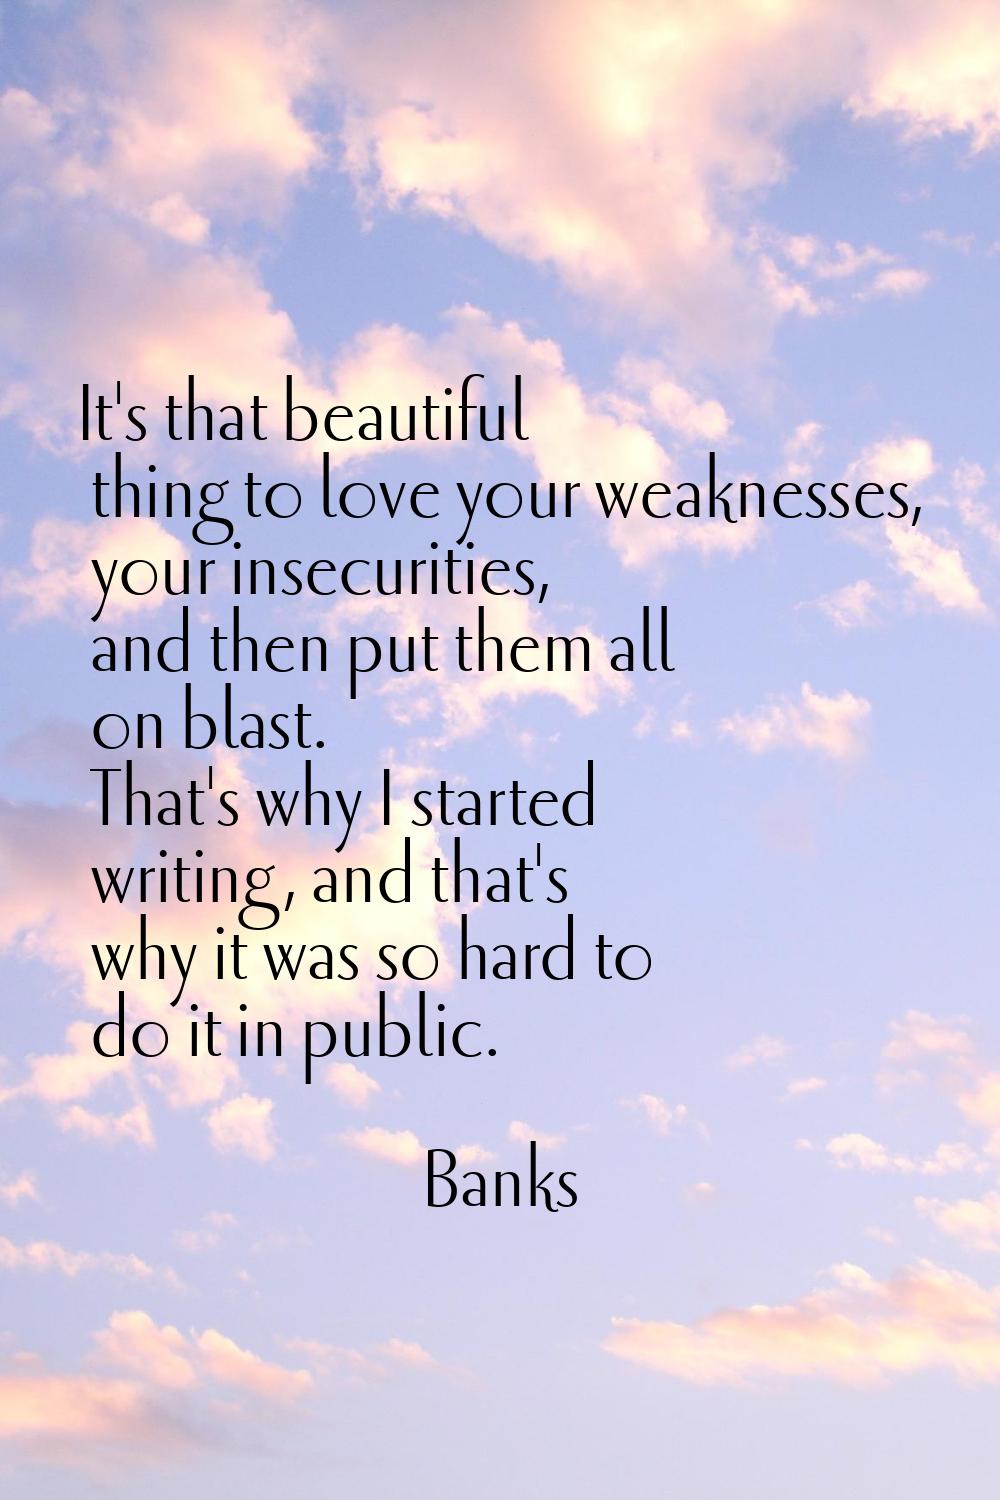 It's that beautiful thing to love your weaknesses, your insecurities, and then put them all on blas